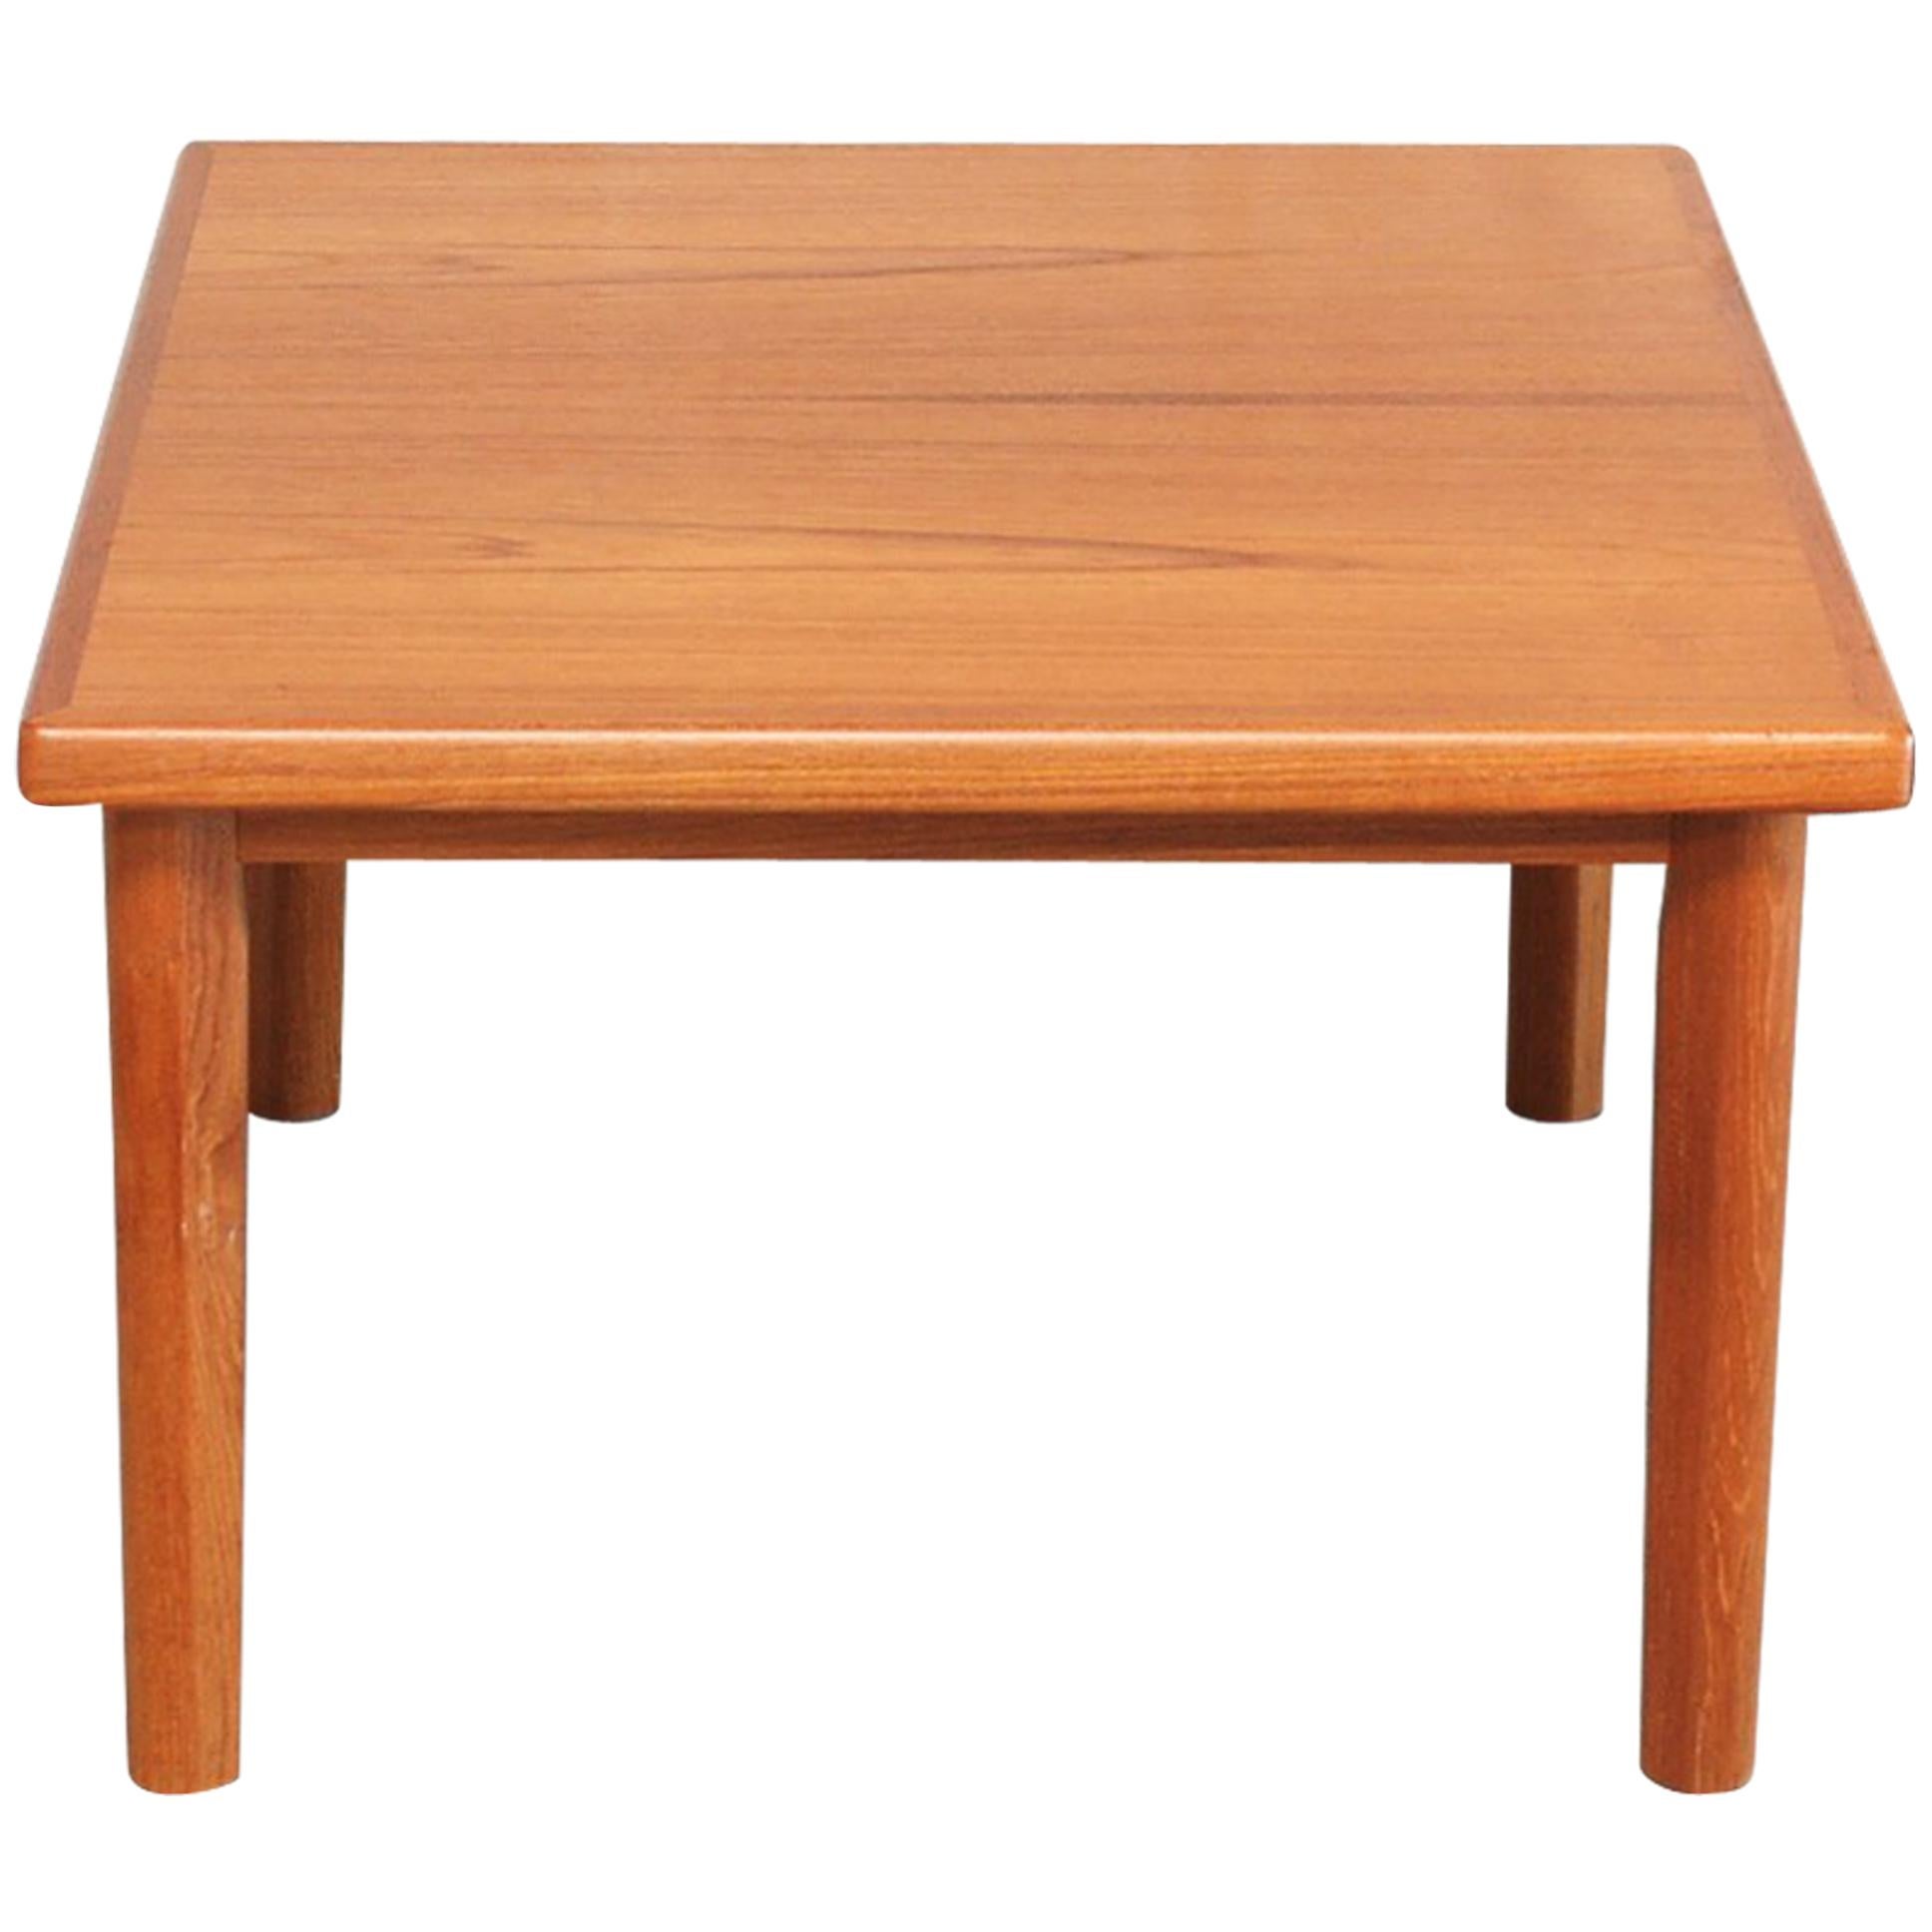 Danish Modern Square Coffee Table in Teak by BRDR Furbo For Sale